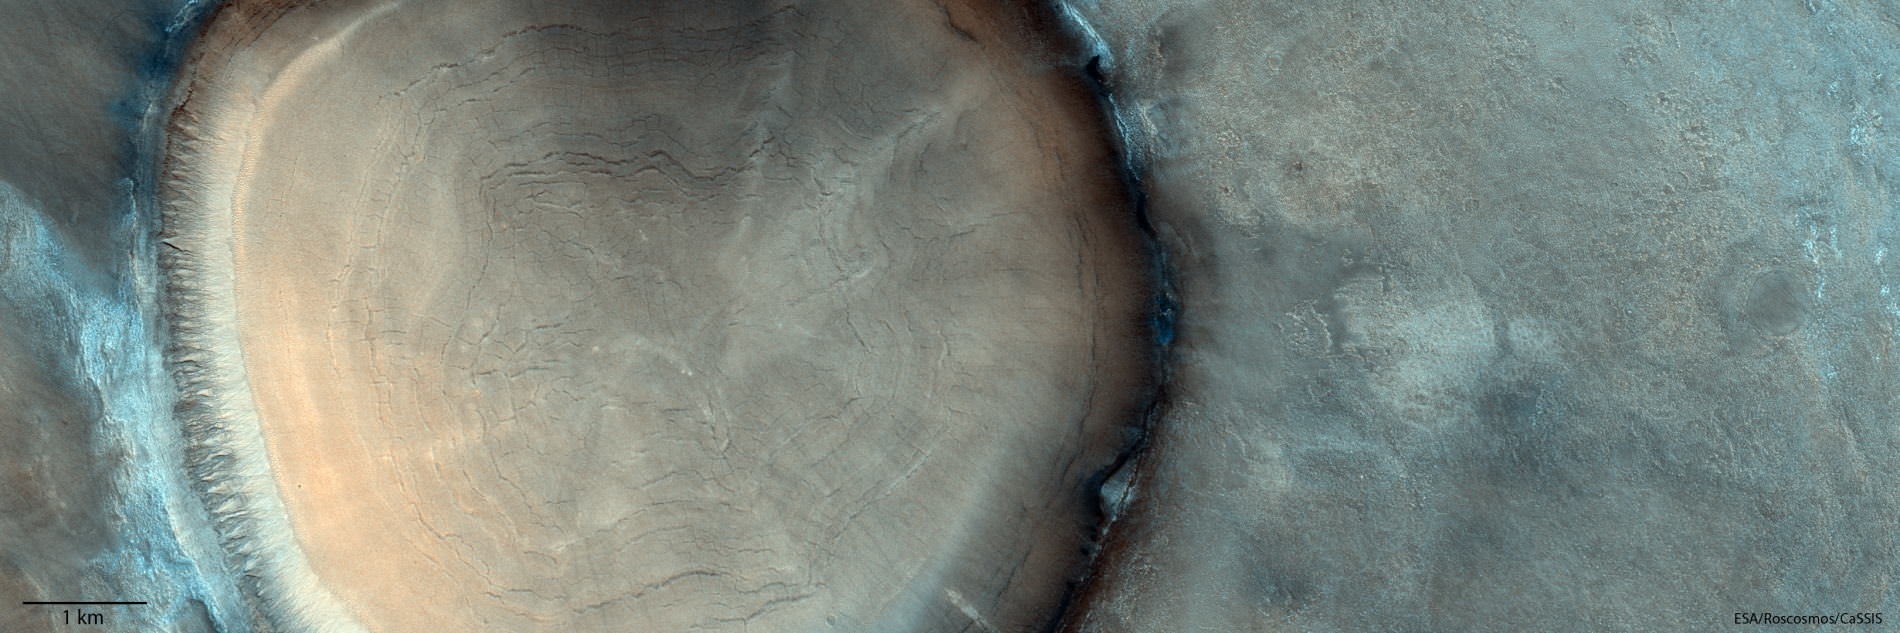 Crater_tree_ring 1 22